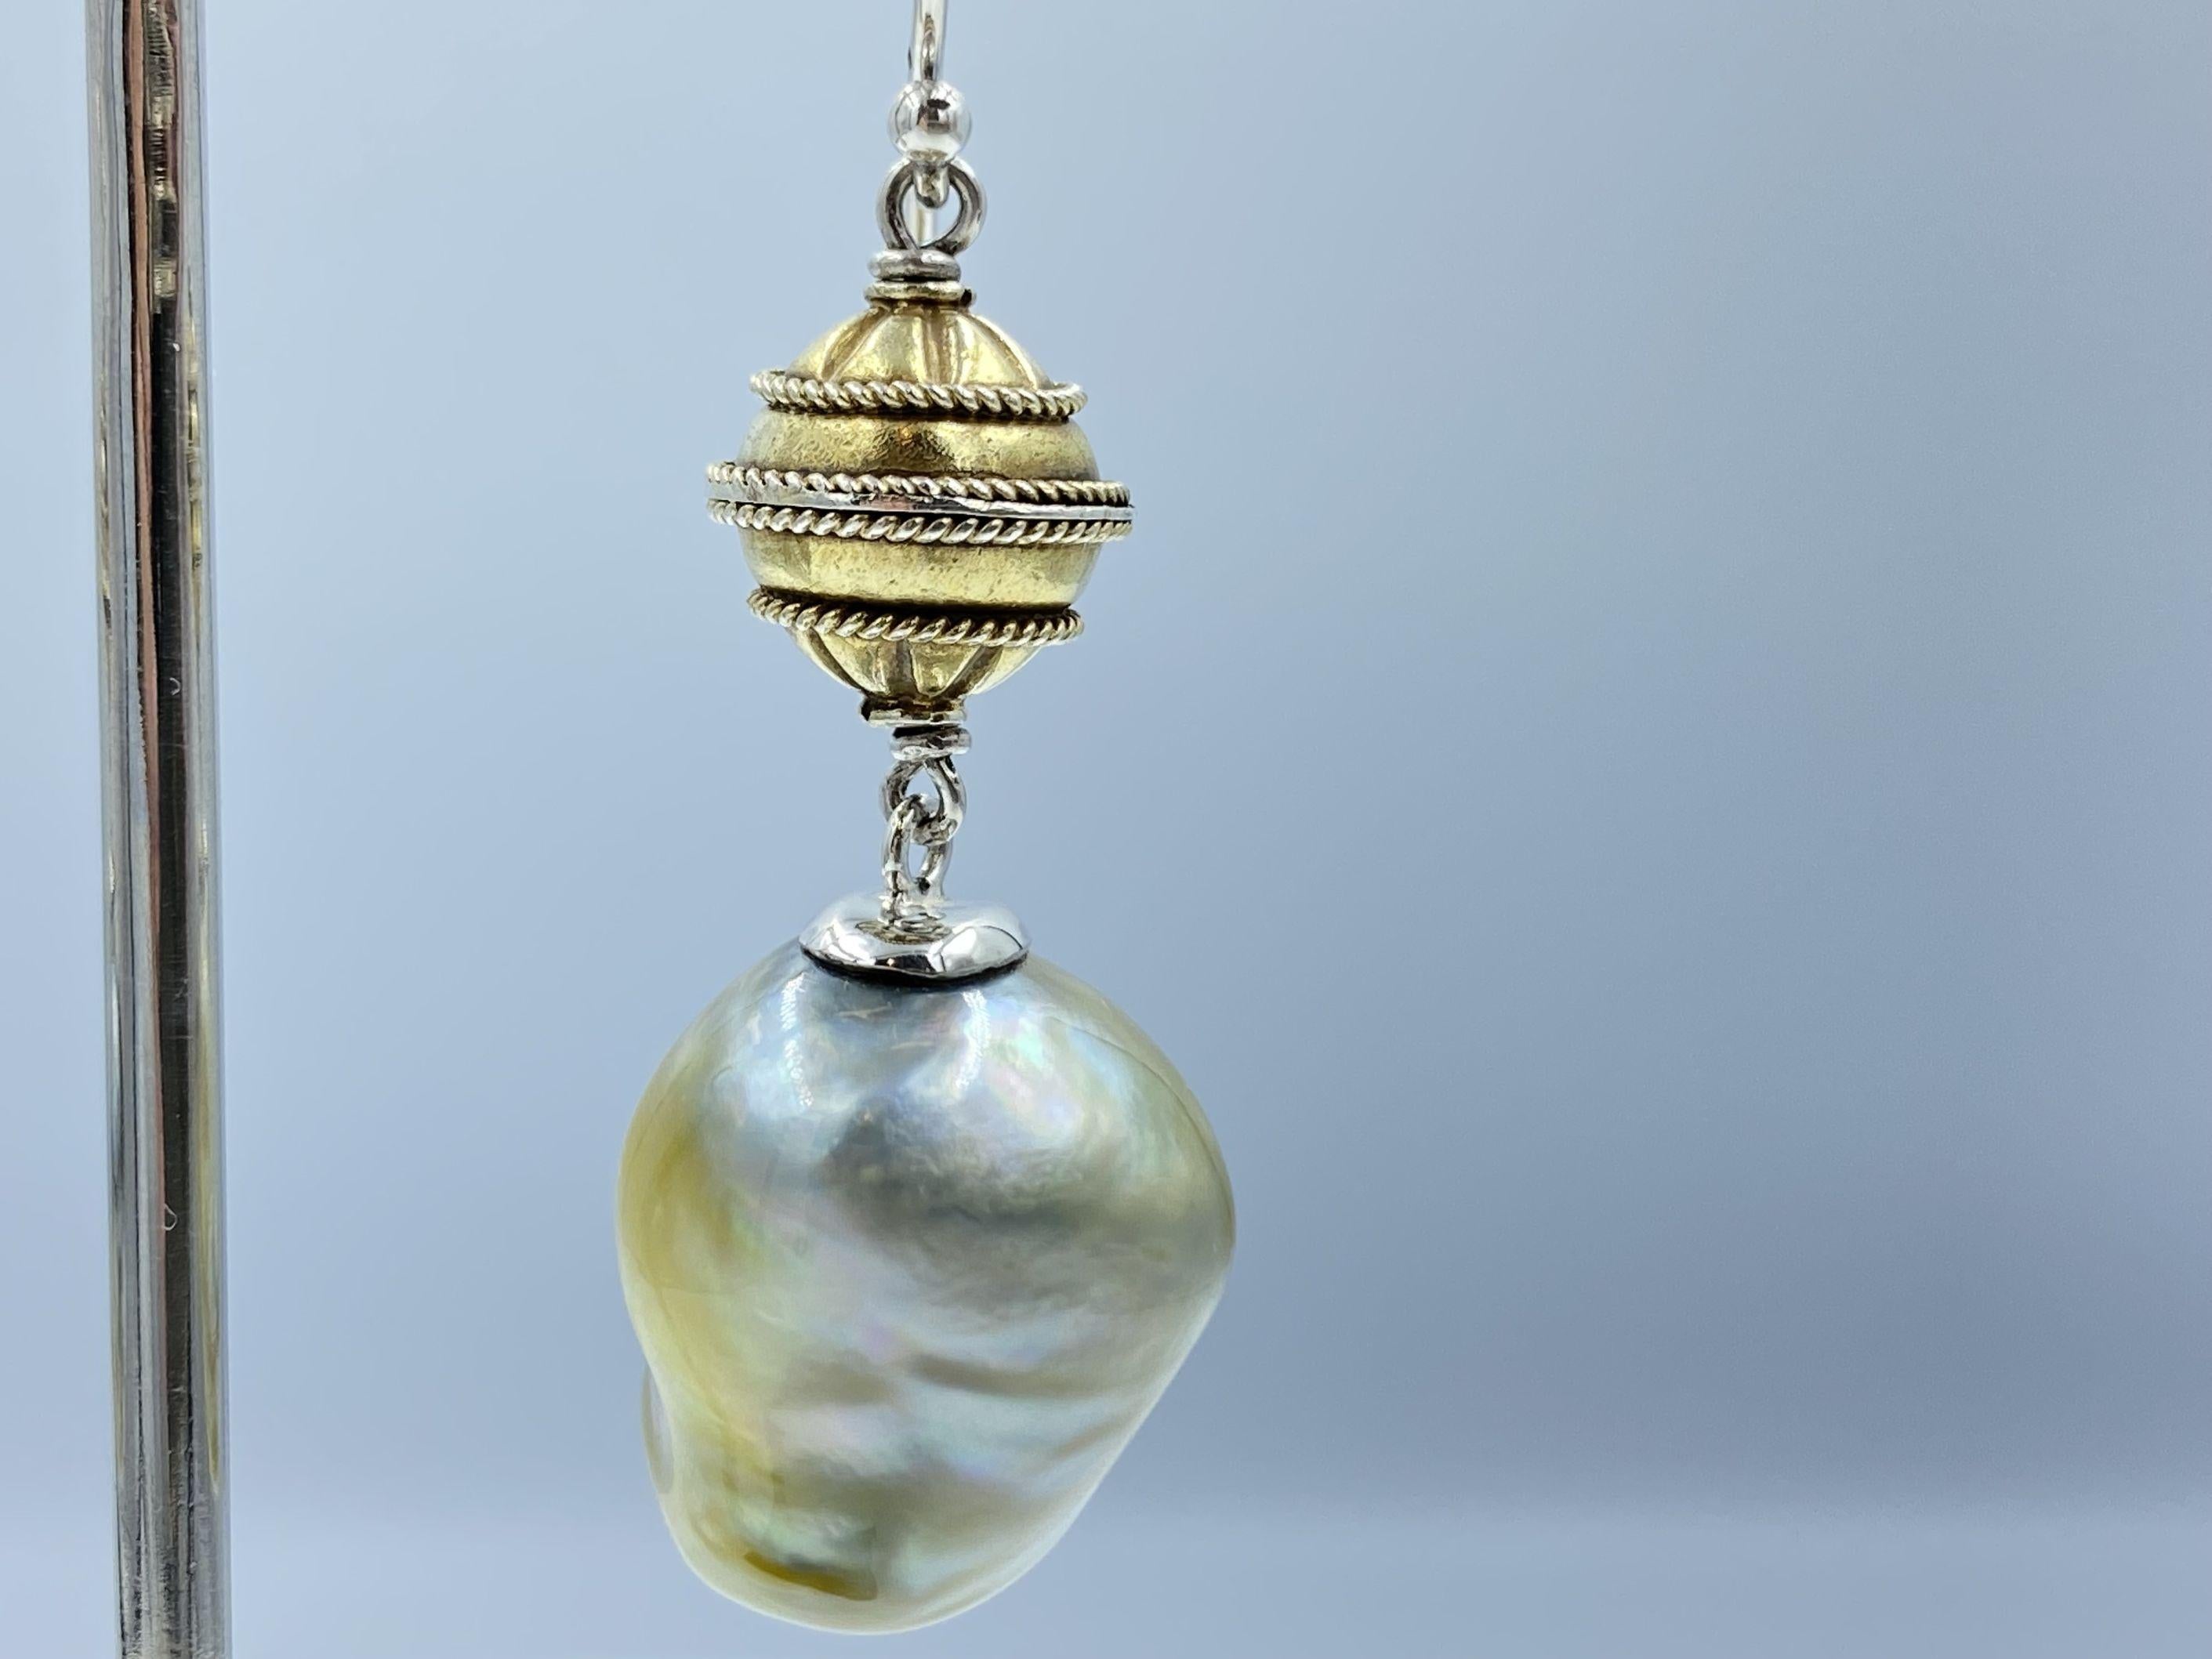 Lustrous, pearlescent baroque south sea pearls finished in Sterling Silver with a gold plated lantern bead, make these drop earrings an unmissable statement piece. Surprisingly light, add style to any outfit in comfort. 

size approx. 5cm long
Pearl